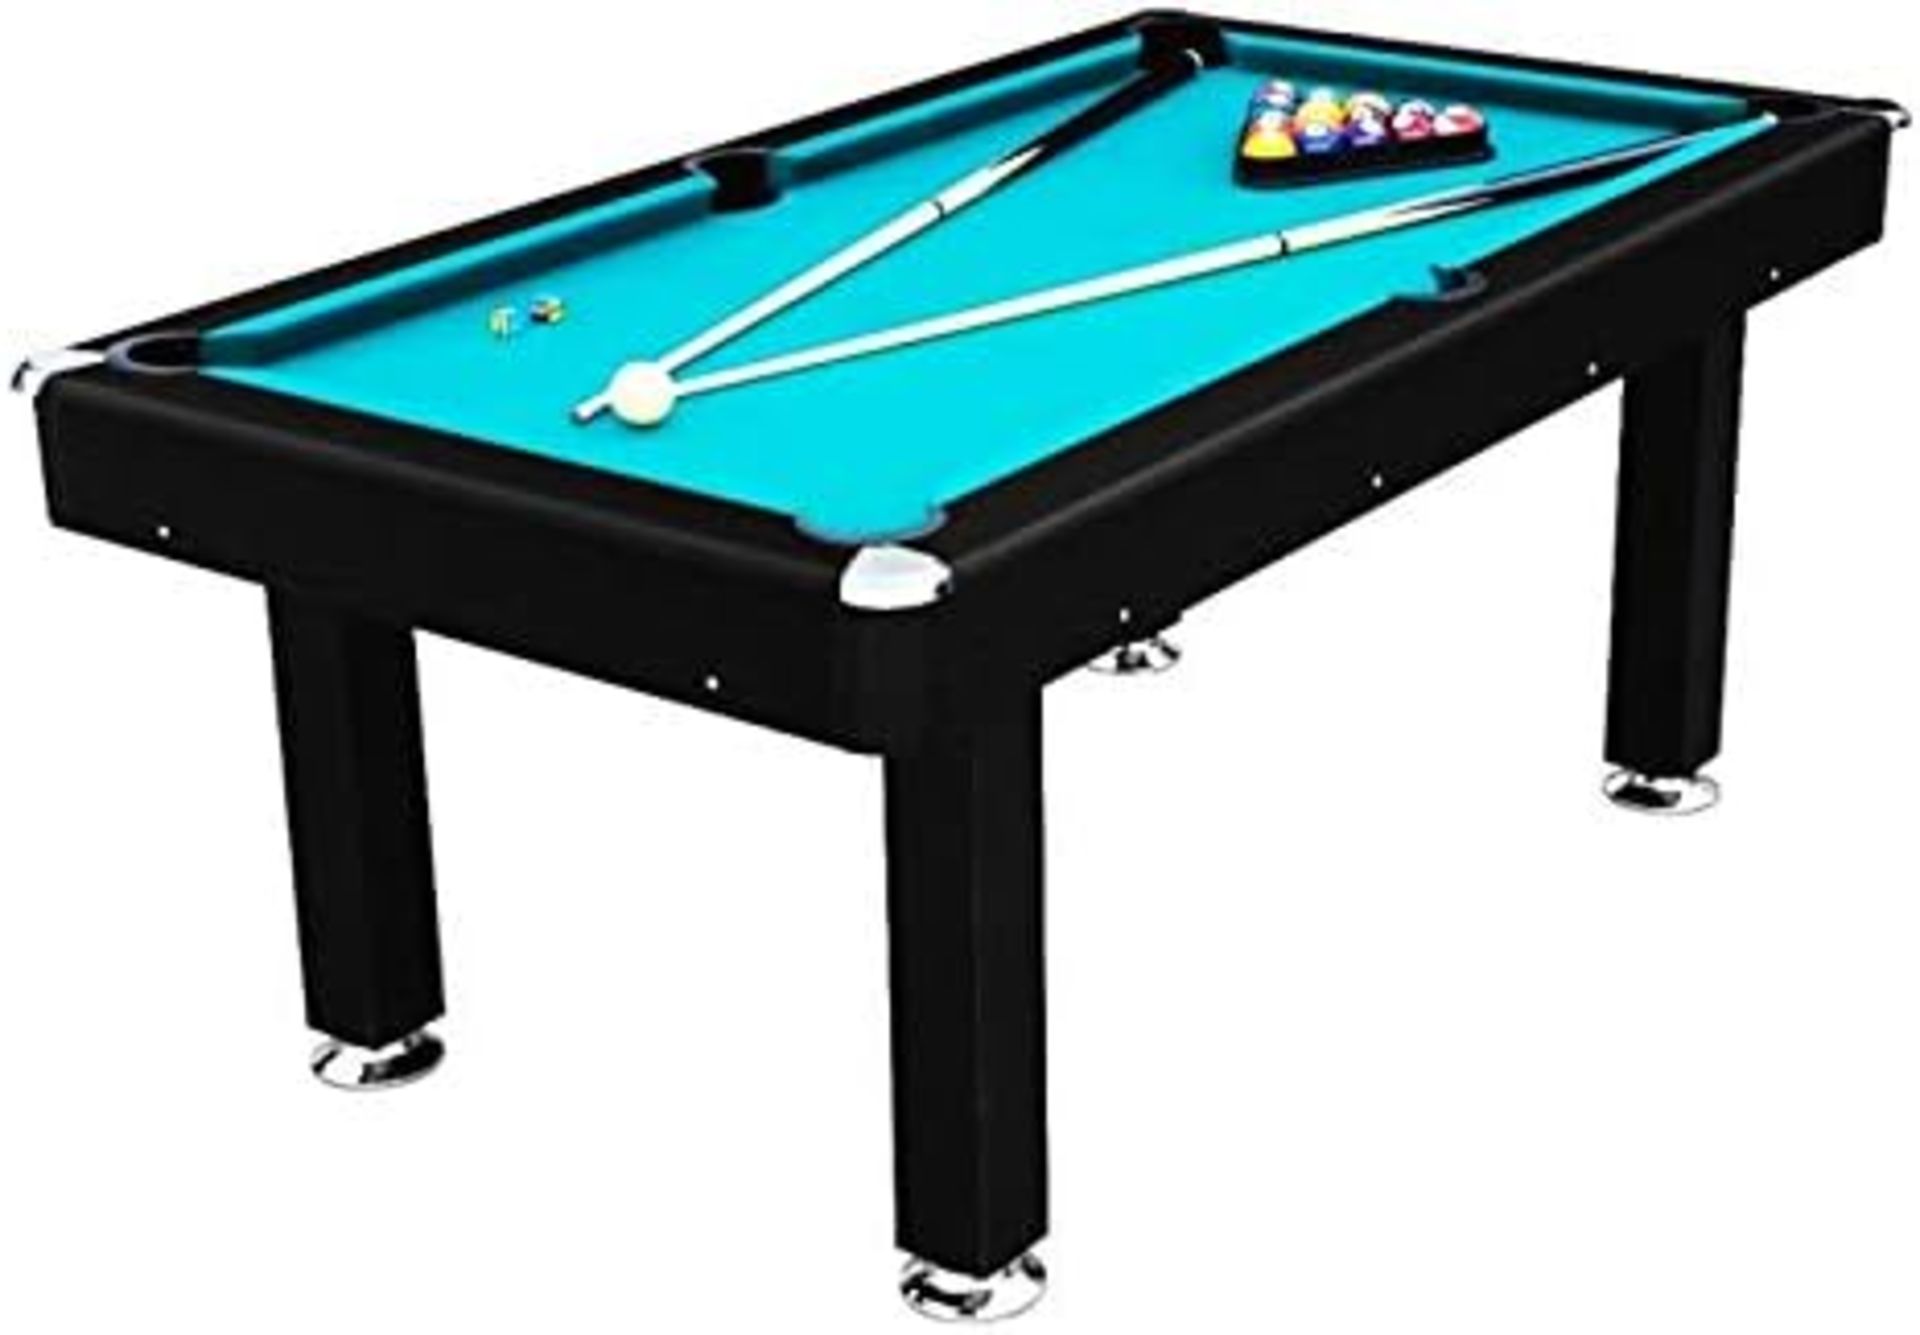 6FT AMERICAN STYLE POOL TABLE COMPLETE WITH CHROME CORNERS, LEVEL-ADJUSTABLE FEET